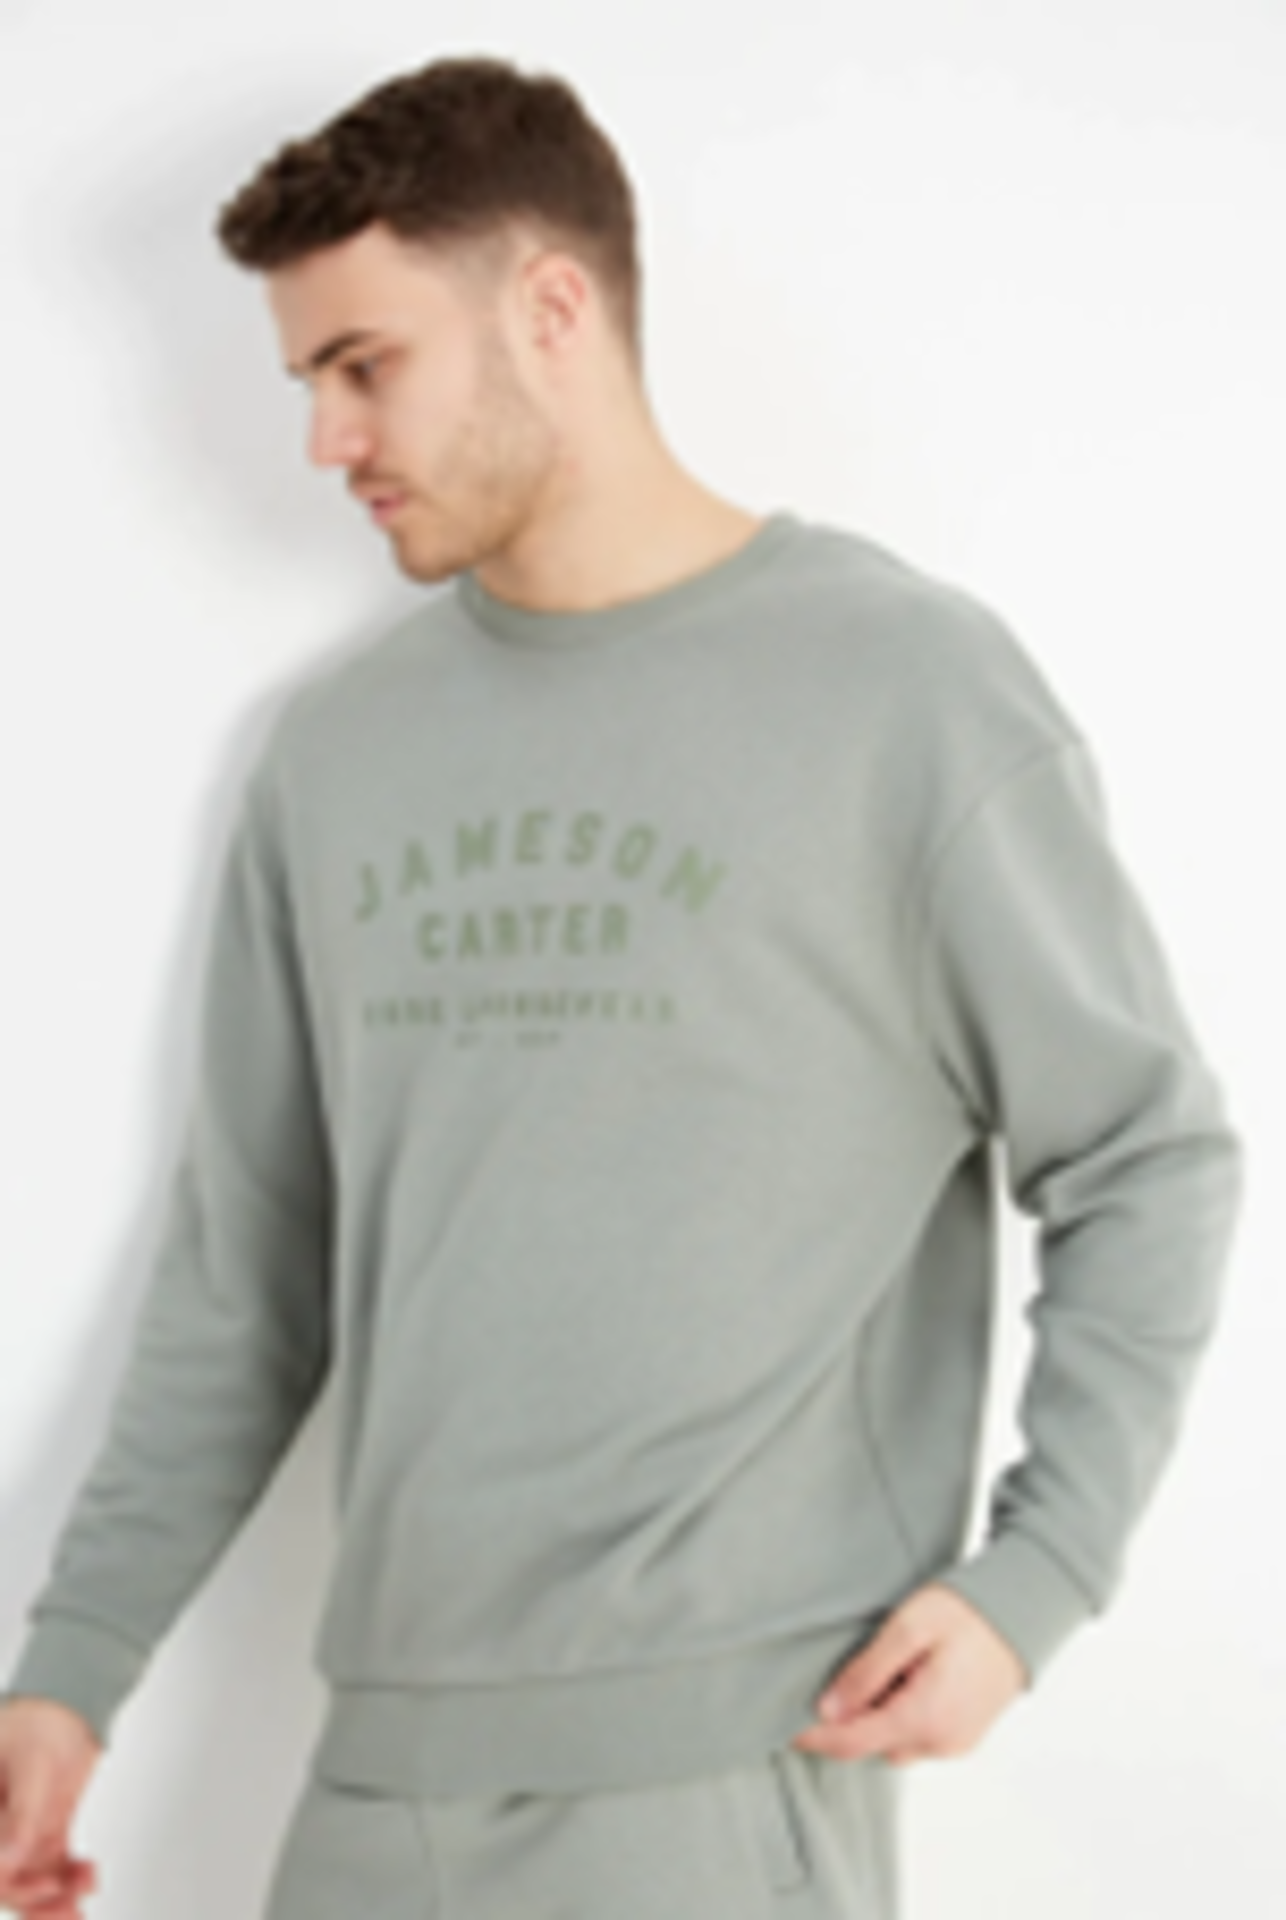 20 x NEW MIXED ITEMS OF JAMESON CARTER STOCK. TO INCLUDE ITEMS SUCH AS: JACKETS, TRACKSUITS, JOGGING - Image 12 of 12